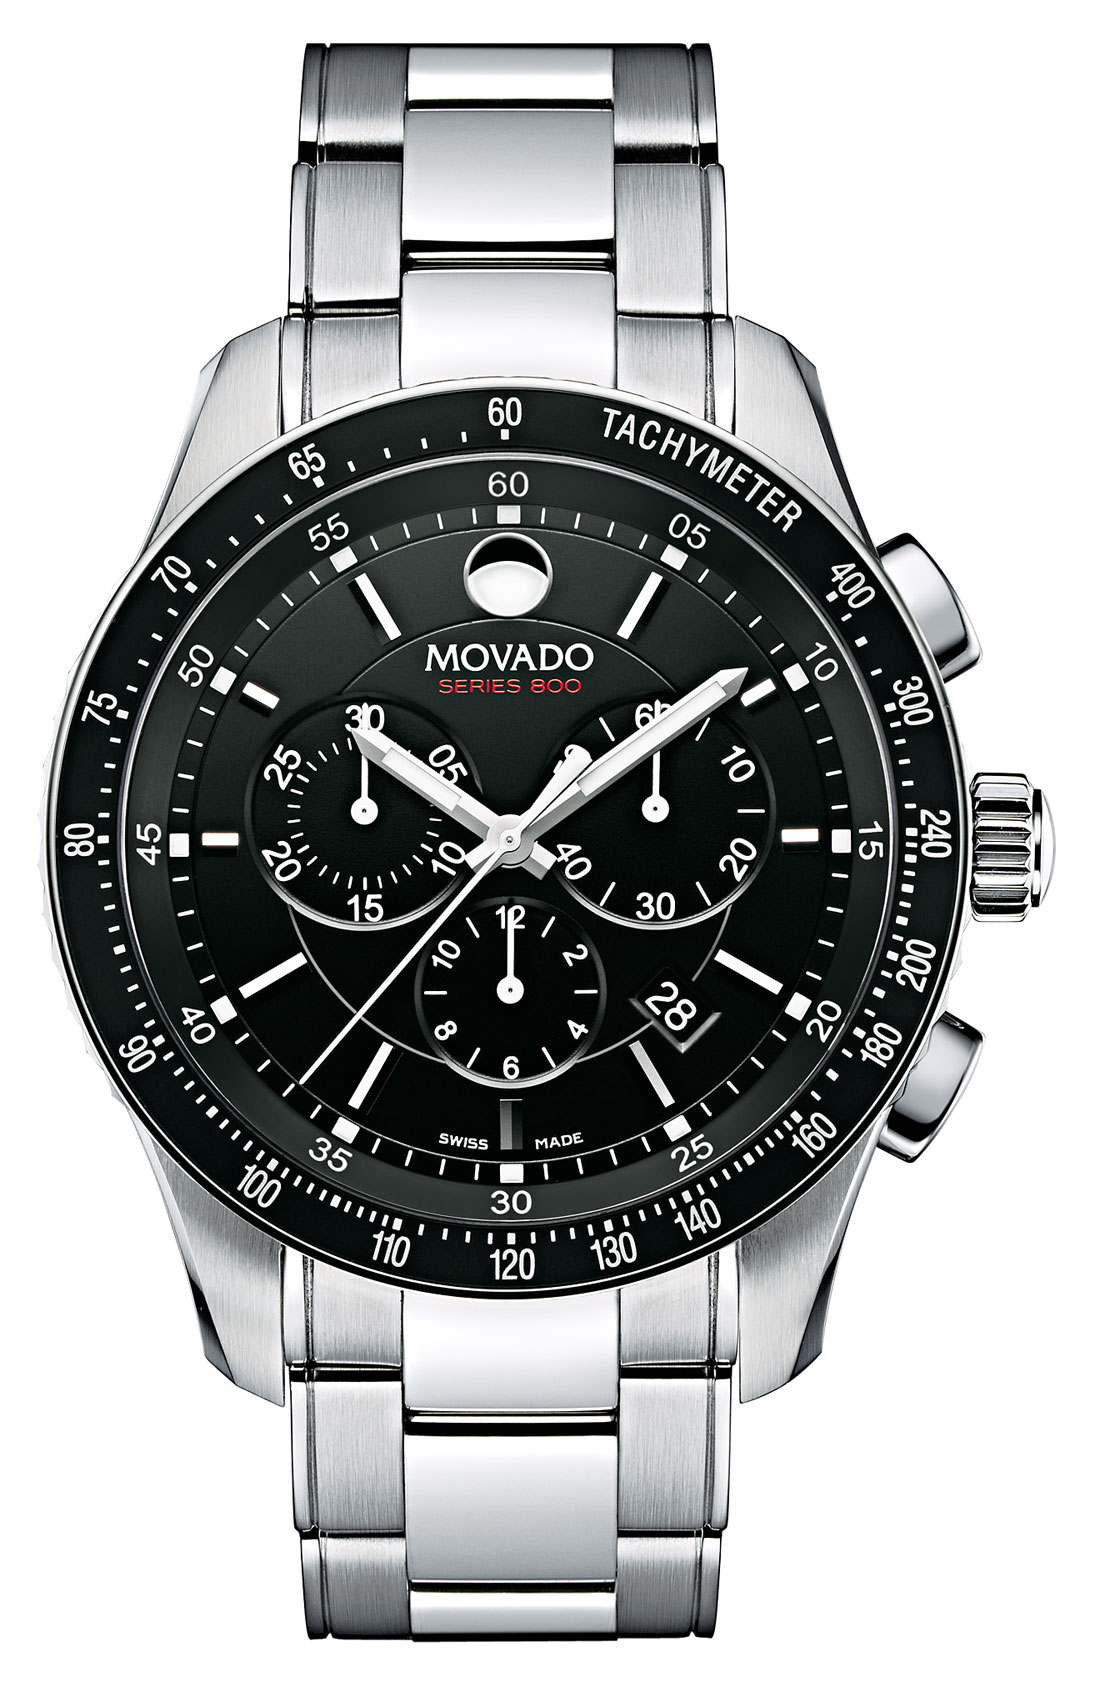 200094 Movado Men's Series 800 Chronograph Stainless Steel Watch